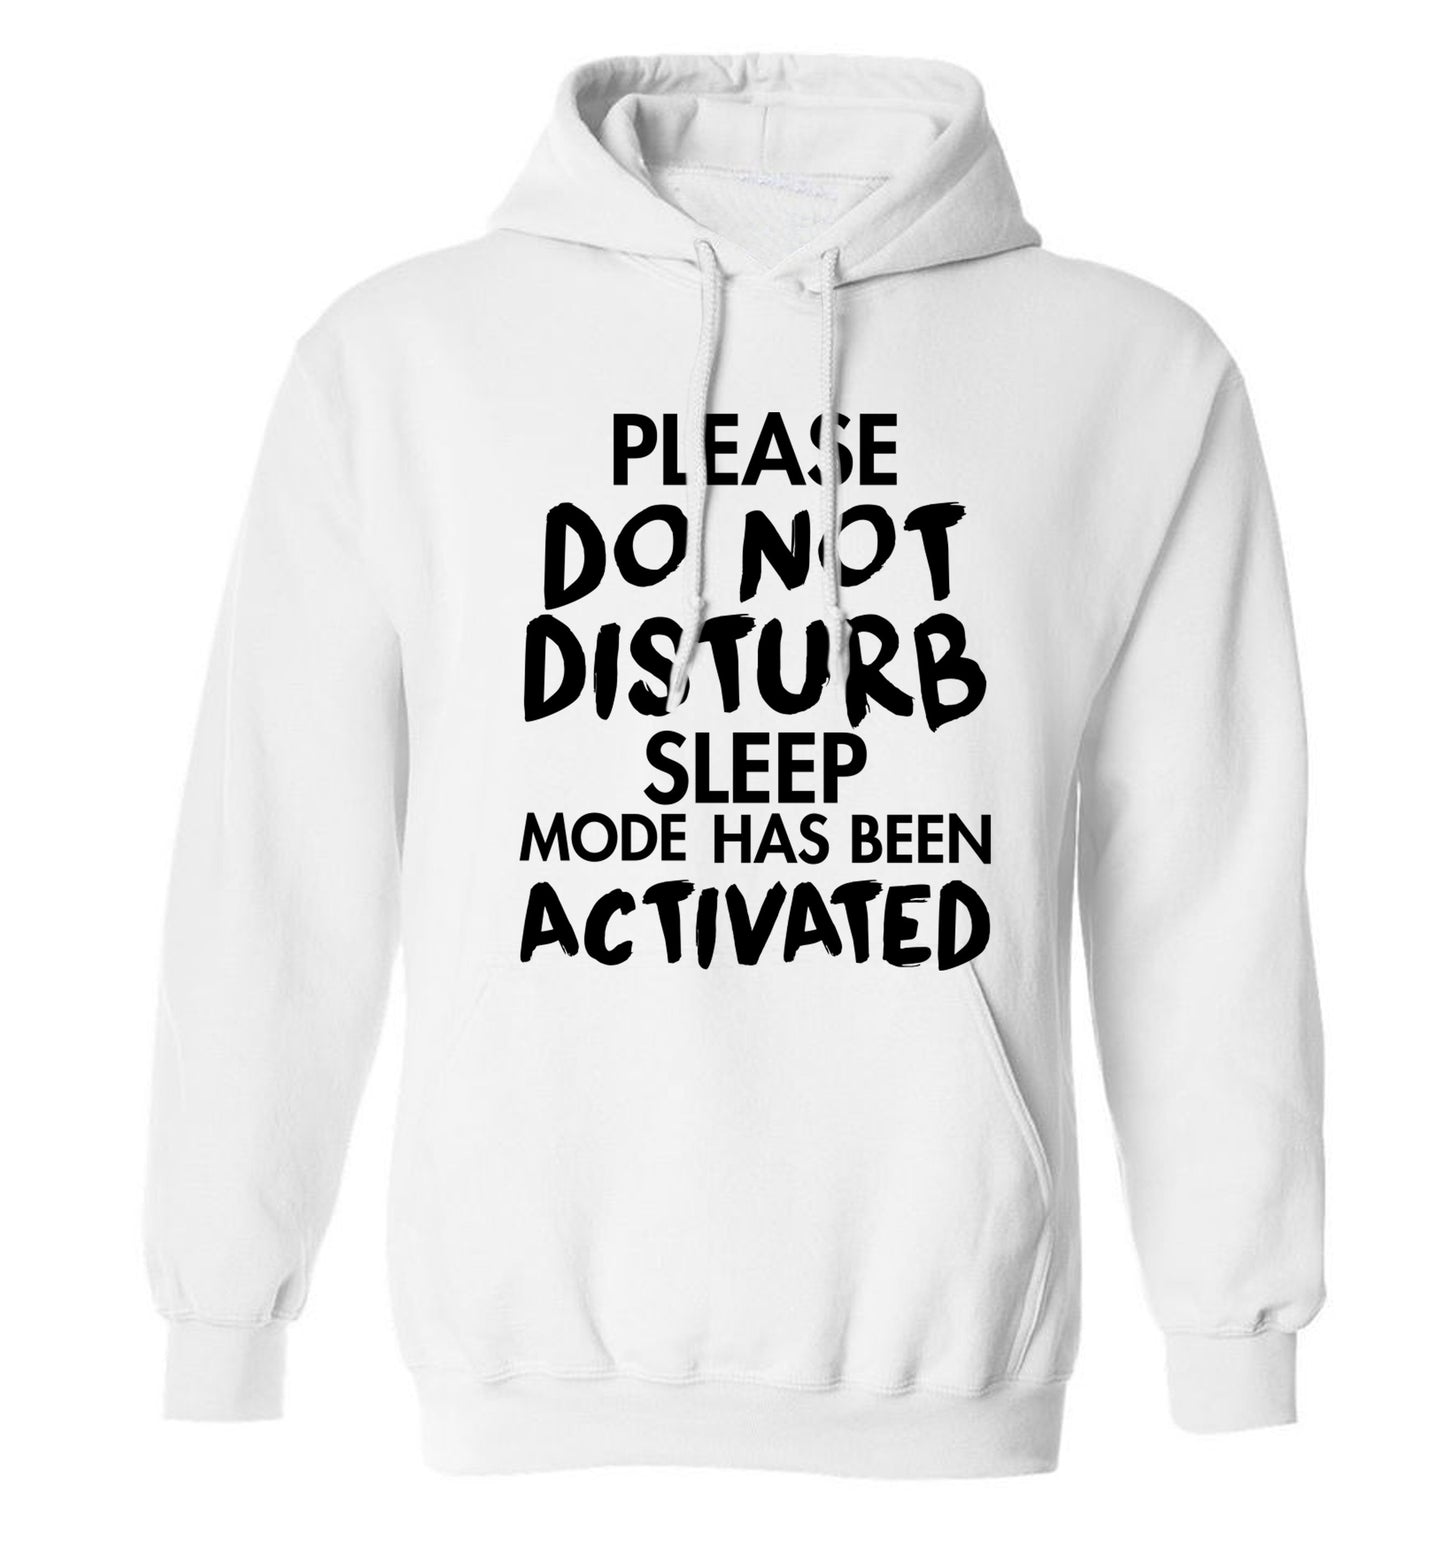 Please do not disturb sleeping mode has been activated adults unisex white hoodie 2XL